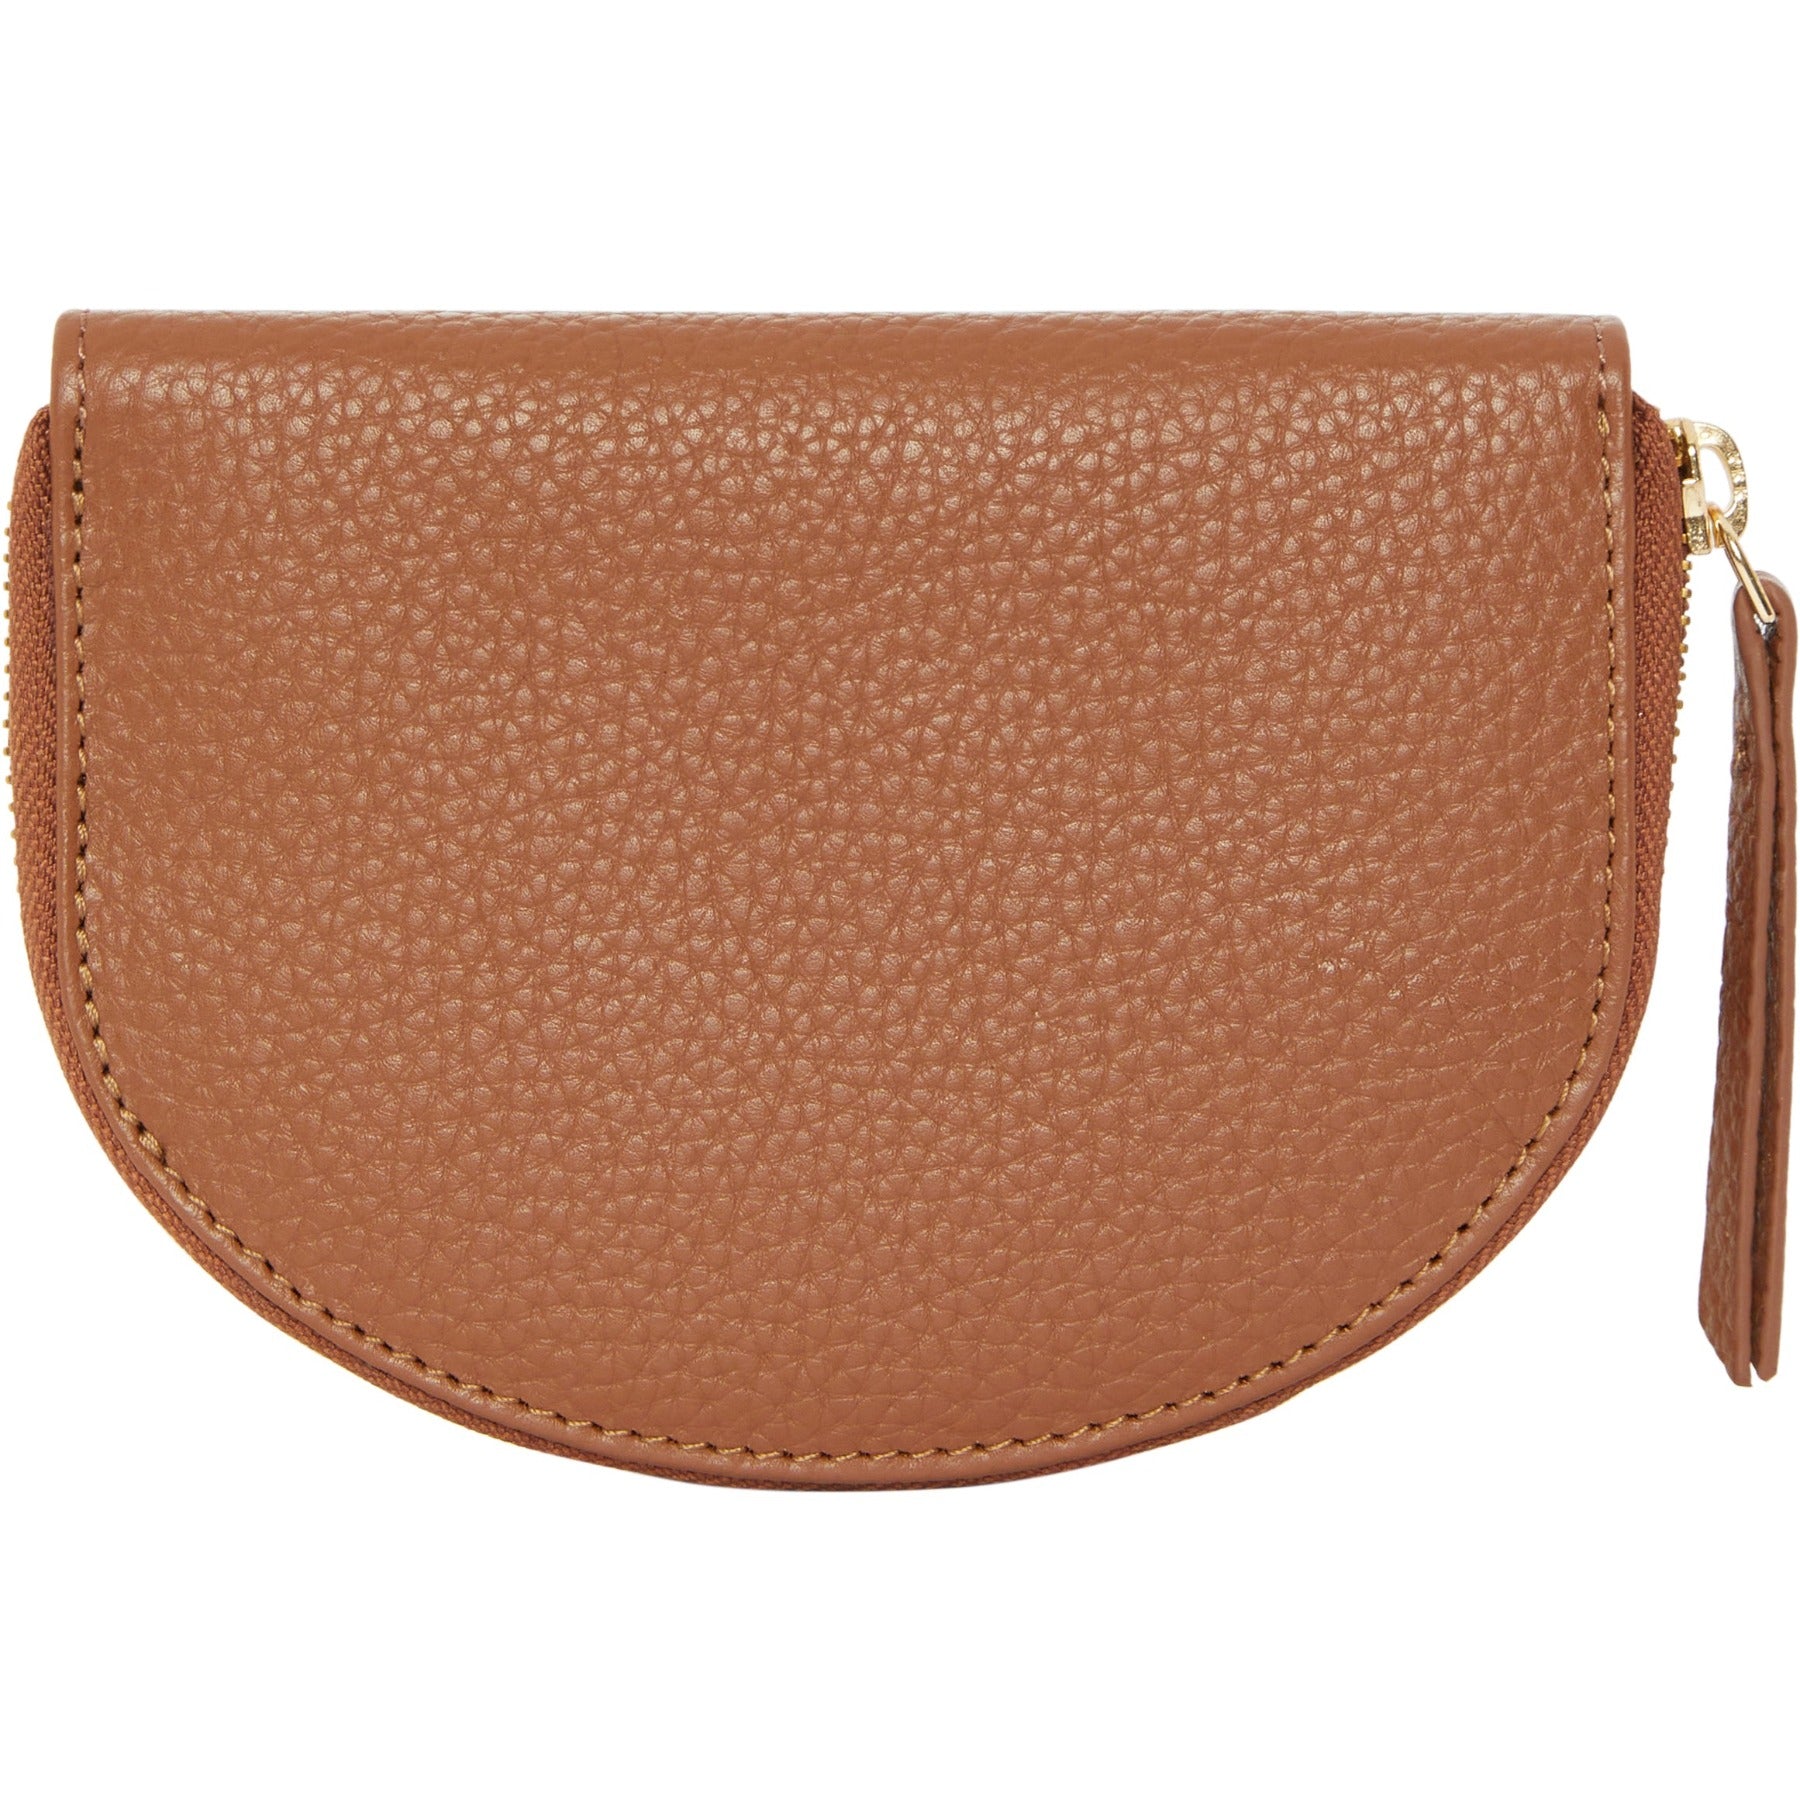 brixbailey-coin-leather-ethical-purse.jpg